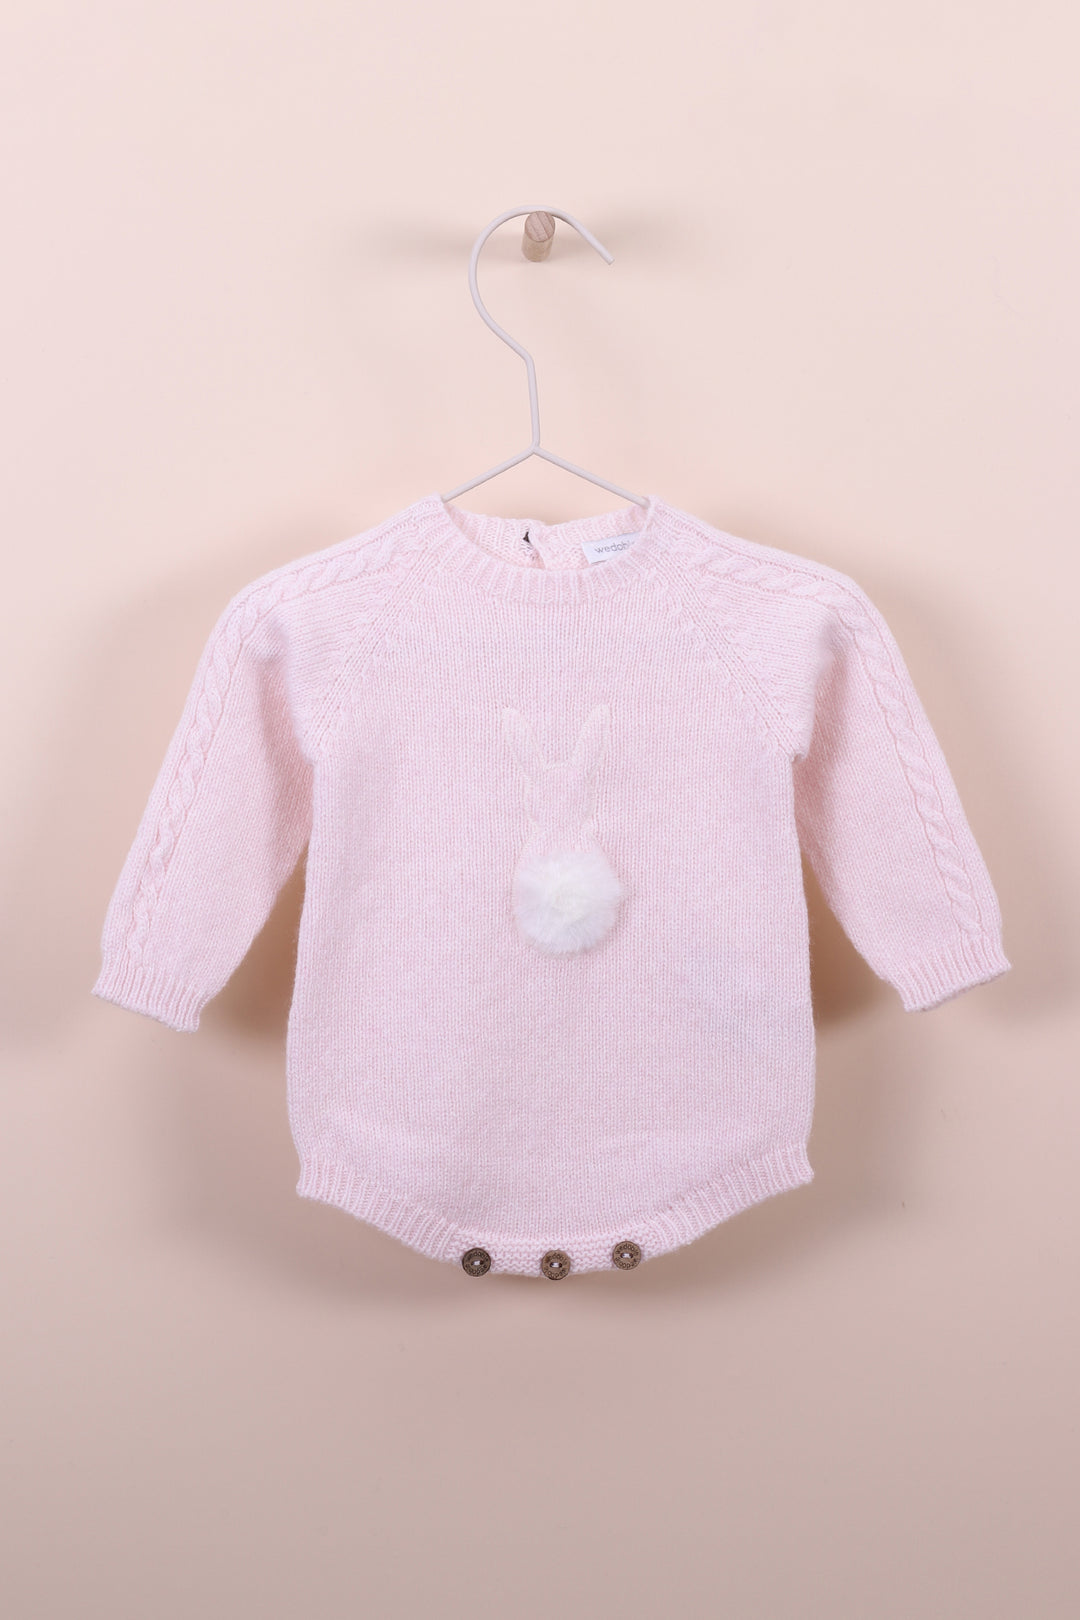 Wedoble "Angel" Cashmere Bunny Shortie | Millie and John